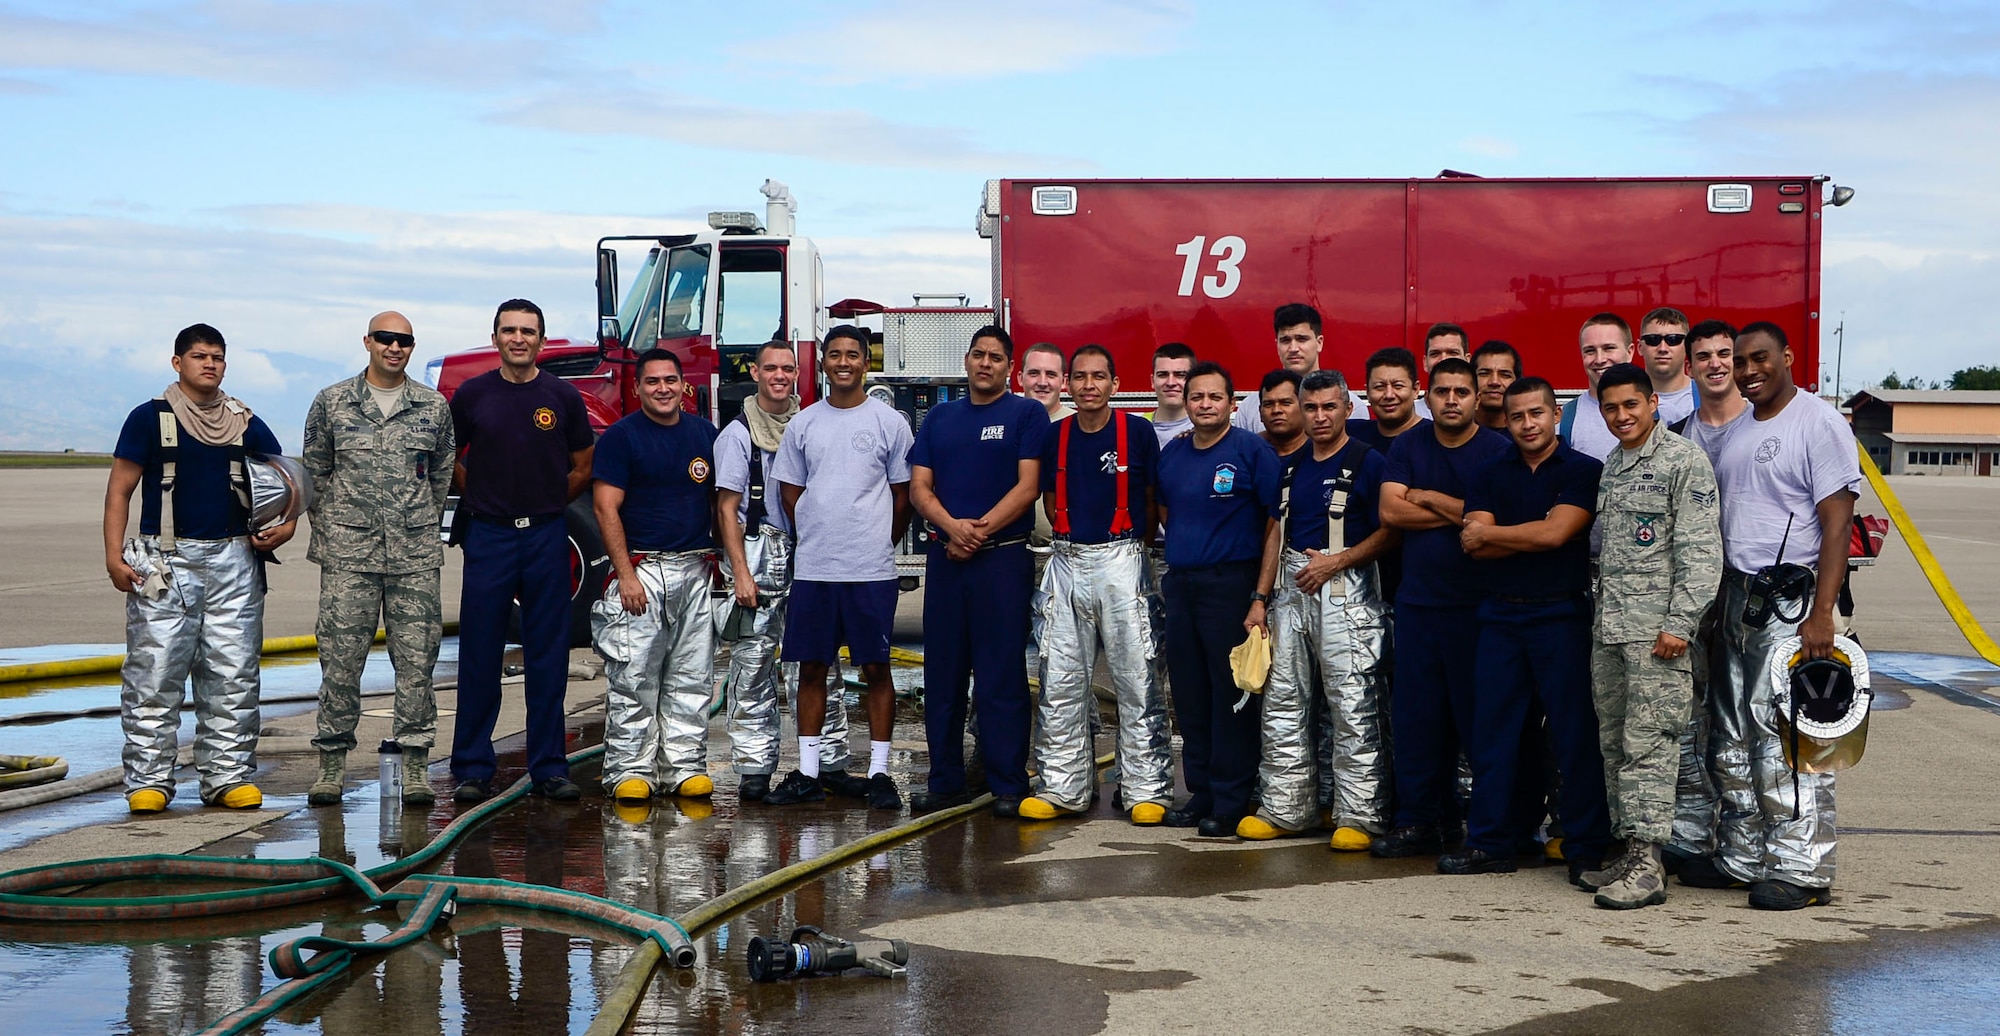 Firefighters from the 612th Air Base Squadron and El Salvador gather together after El Salvador’s Autonomous Executive Port Commission airport firefighter live fires Dec. 3, 2014, on Soto Cano Air Base, Honduras. The 612th ABS firefighters facilitated El Salvador’s Autonomous Executive Port Commission airport firefighter qualification by providing live fires. The Salvadoran airport firefighters have a requirement very similar to the United States standards that requires members of their airport fire departments to be qualified annually on their ability to control a live fire. (U.S. Air Force photo/Tech. Sgt. Heather Redman) 